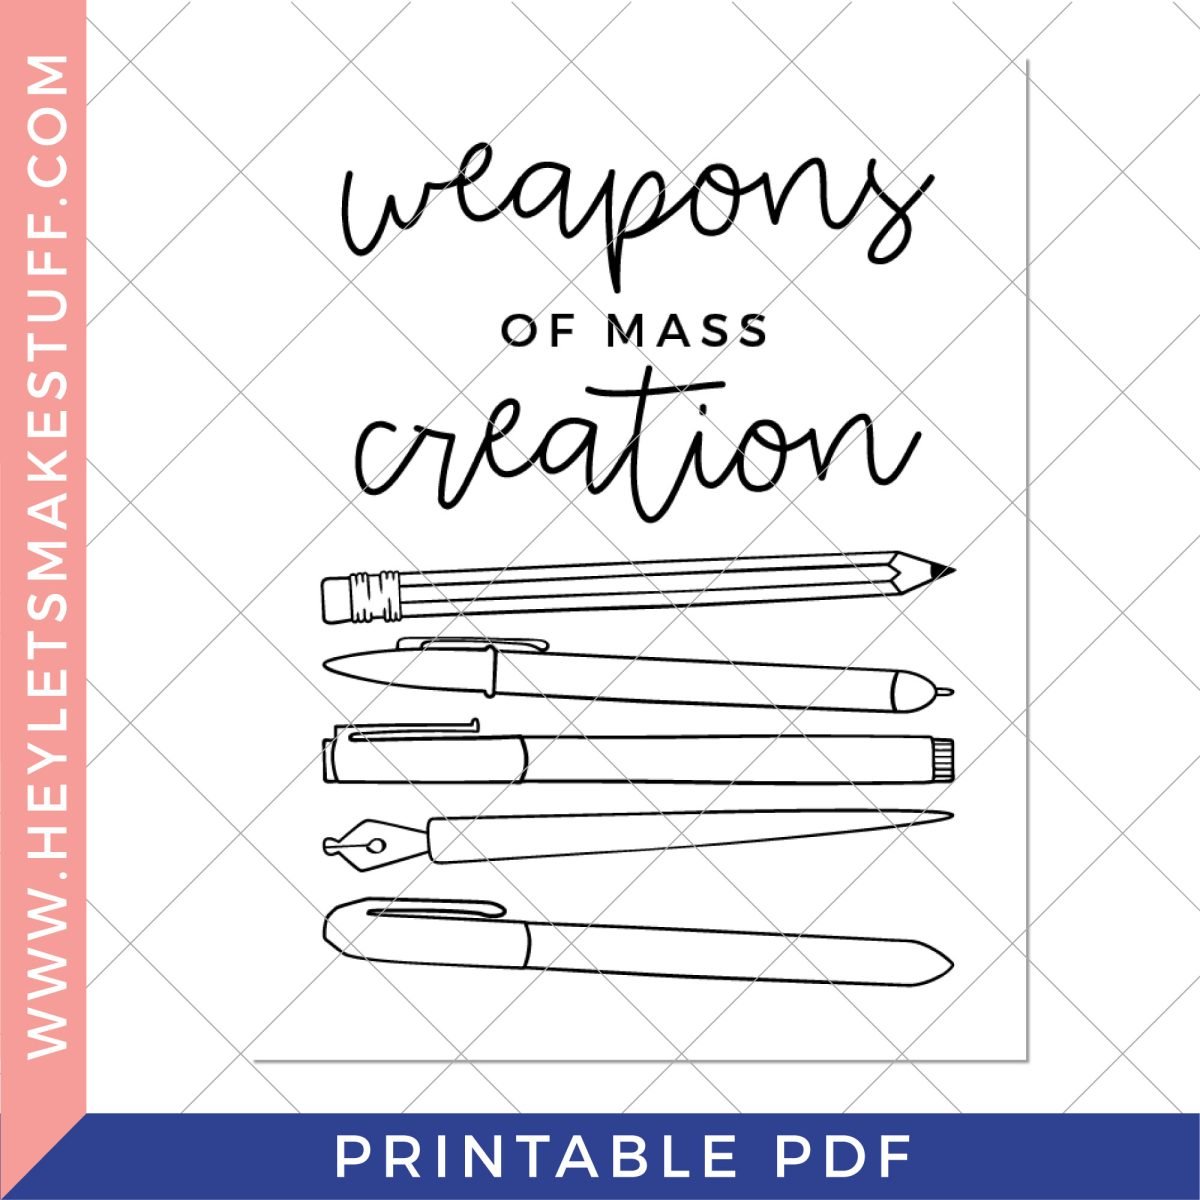 Black and White version of Weapons of Mass Creation Printable